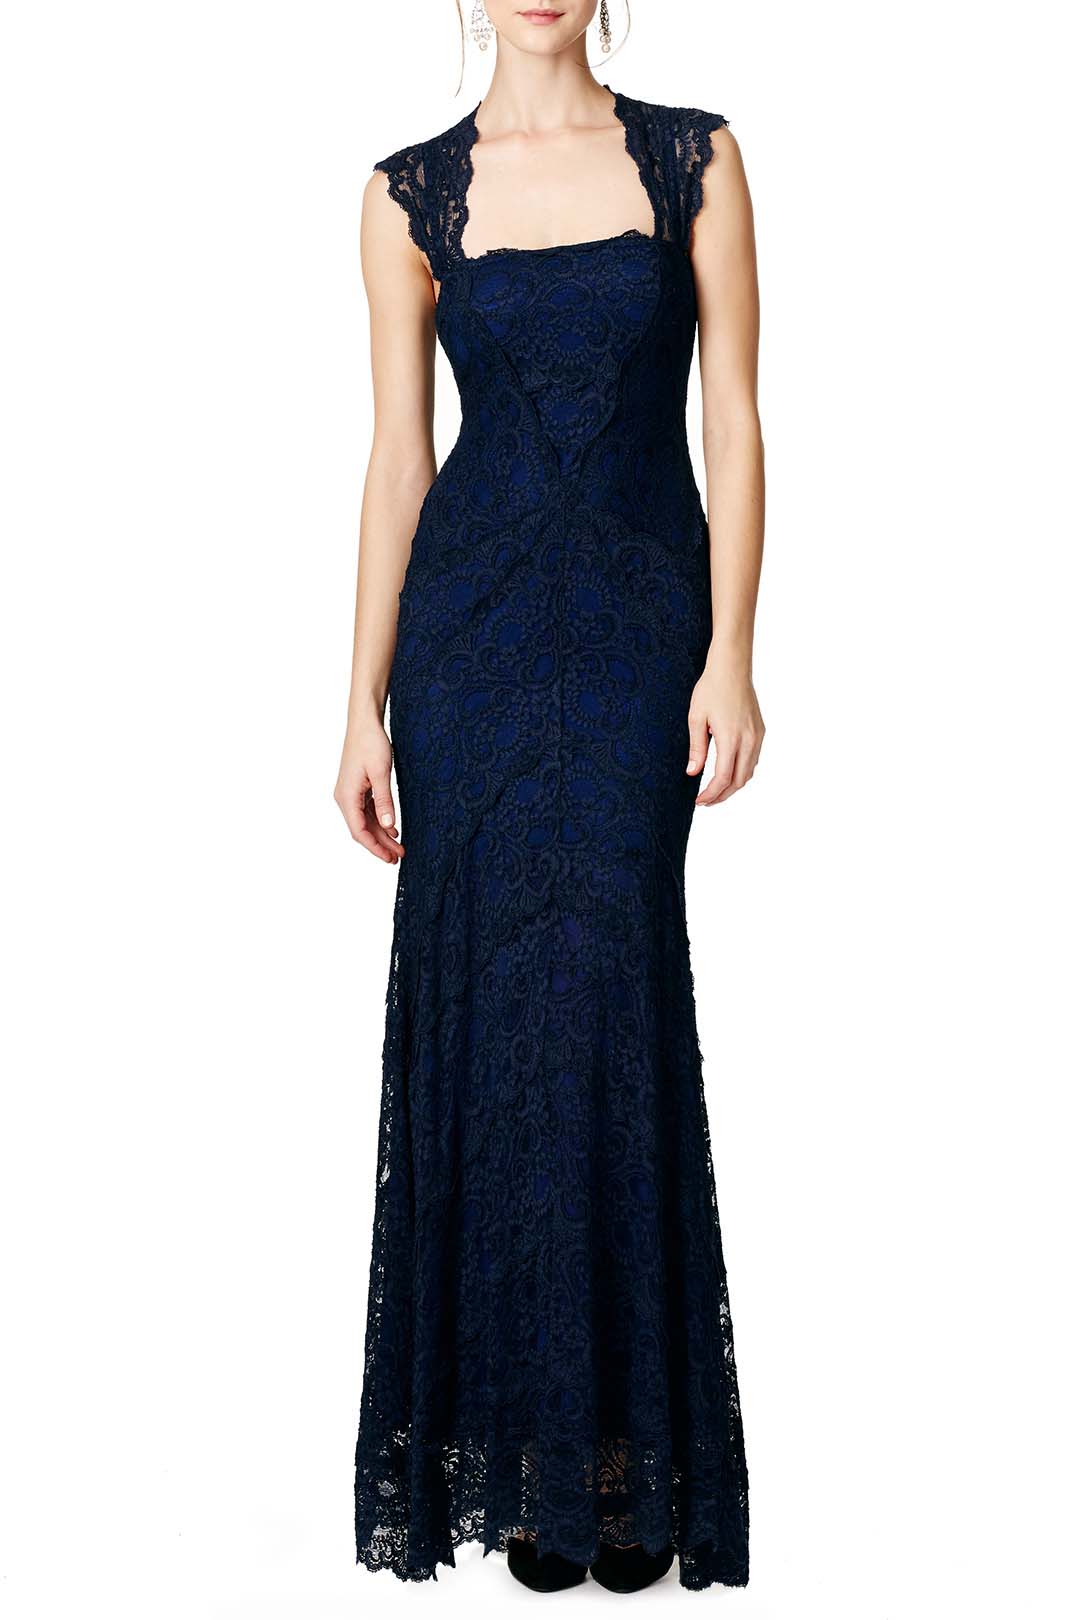 rent the runway nicole miller lady in waiting ball gown